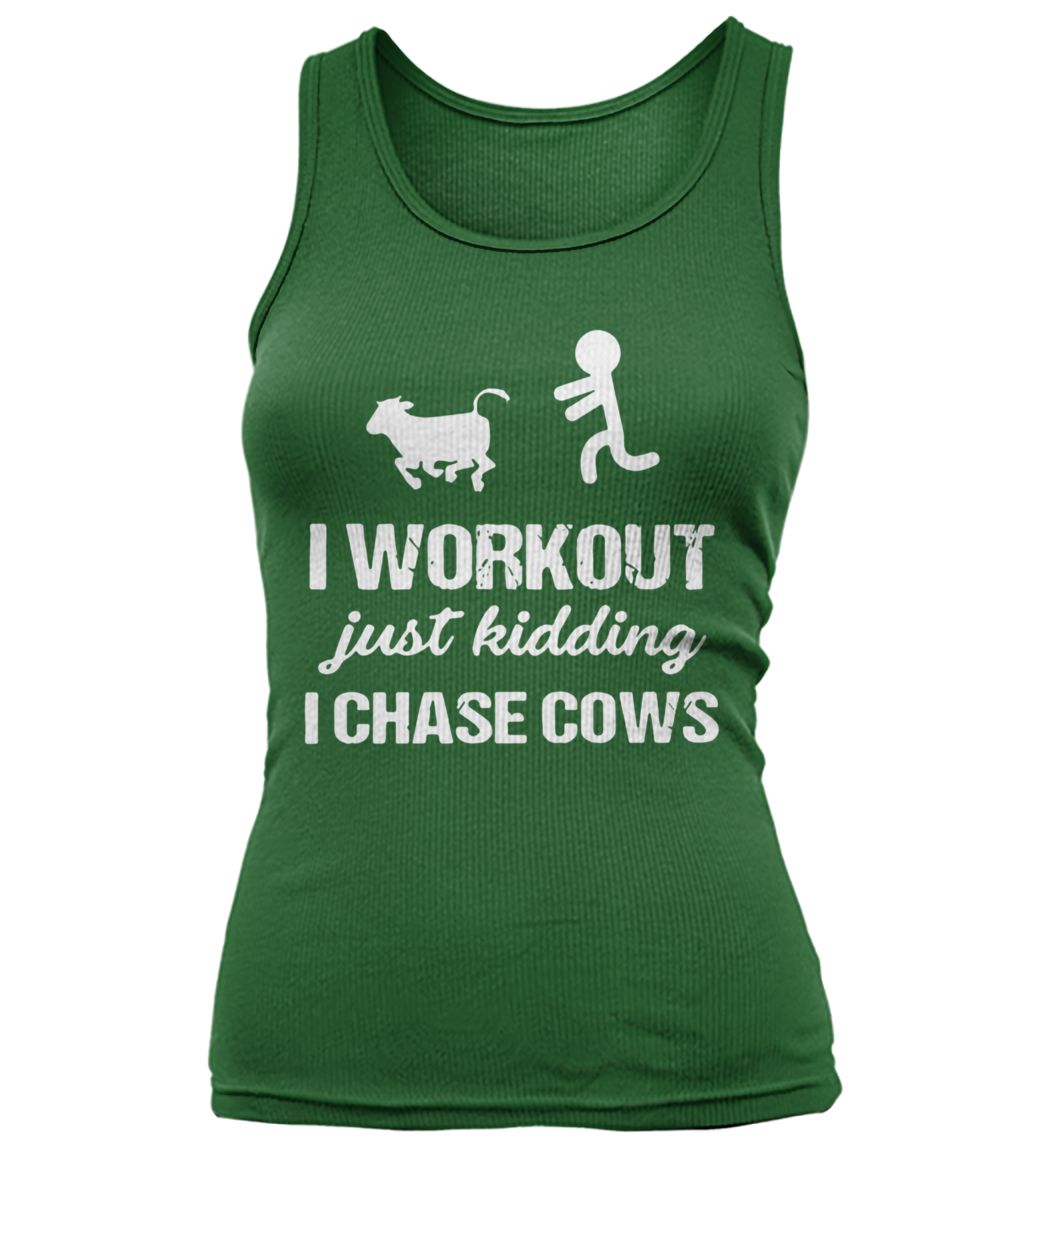 I workout just kidding I chase cows women's tank top